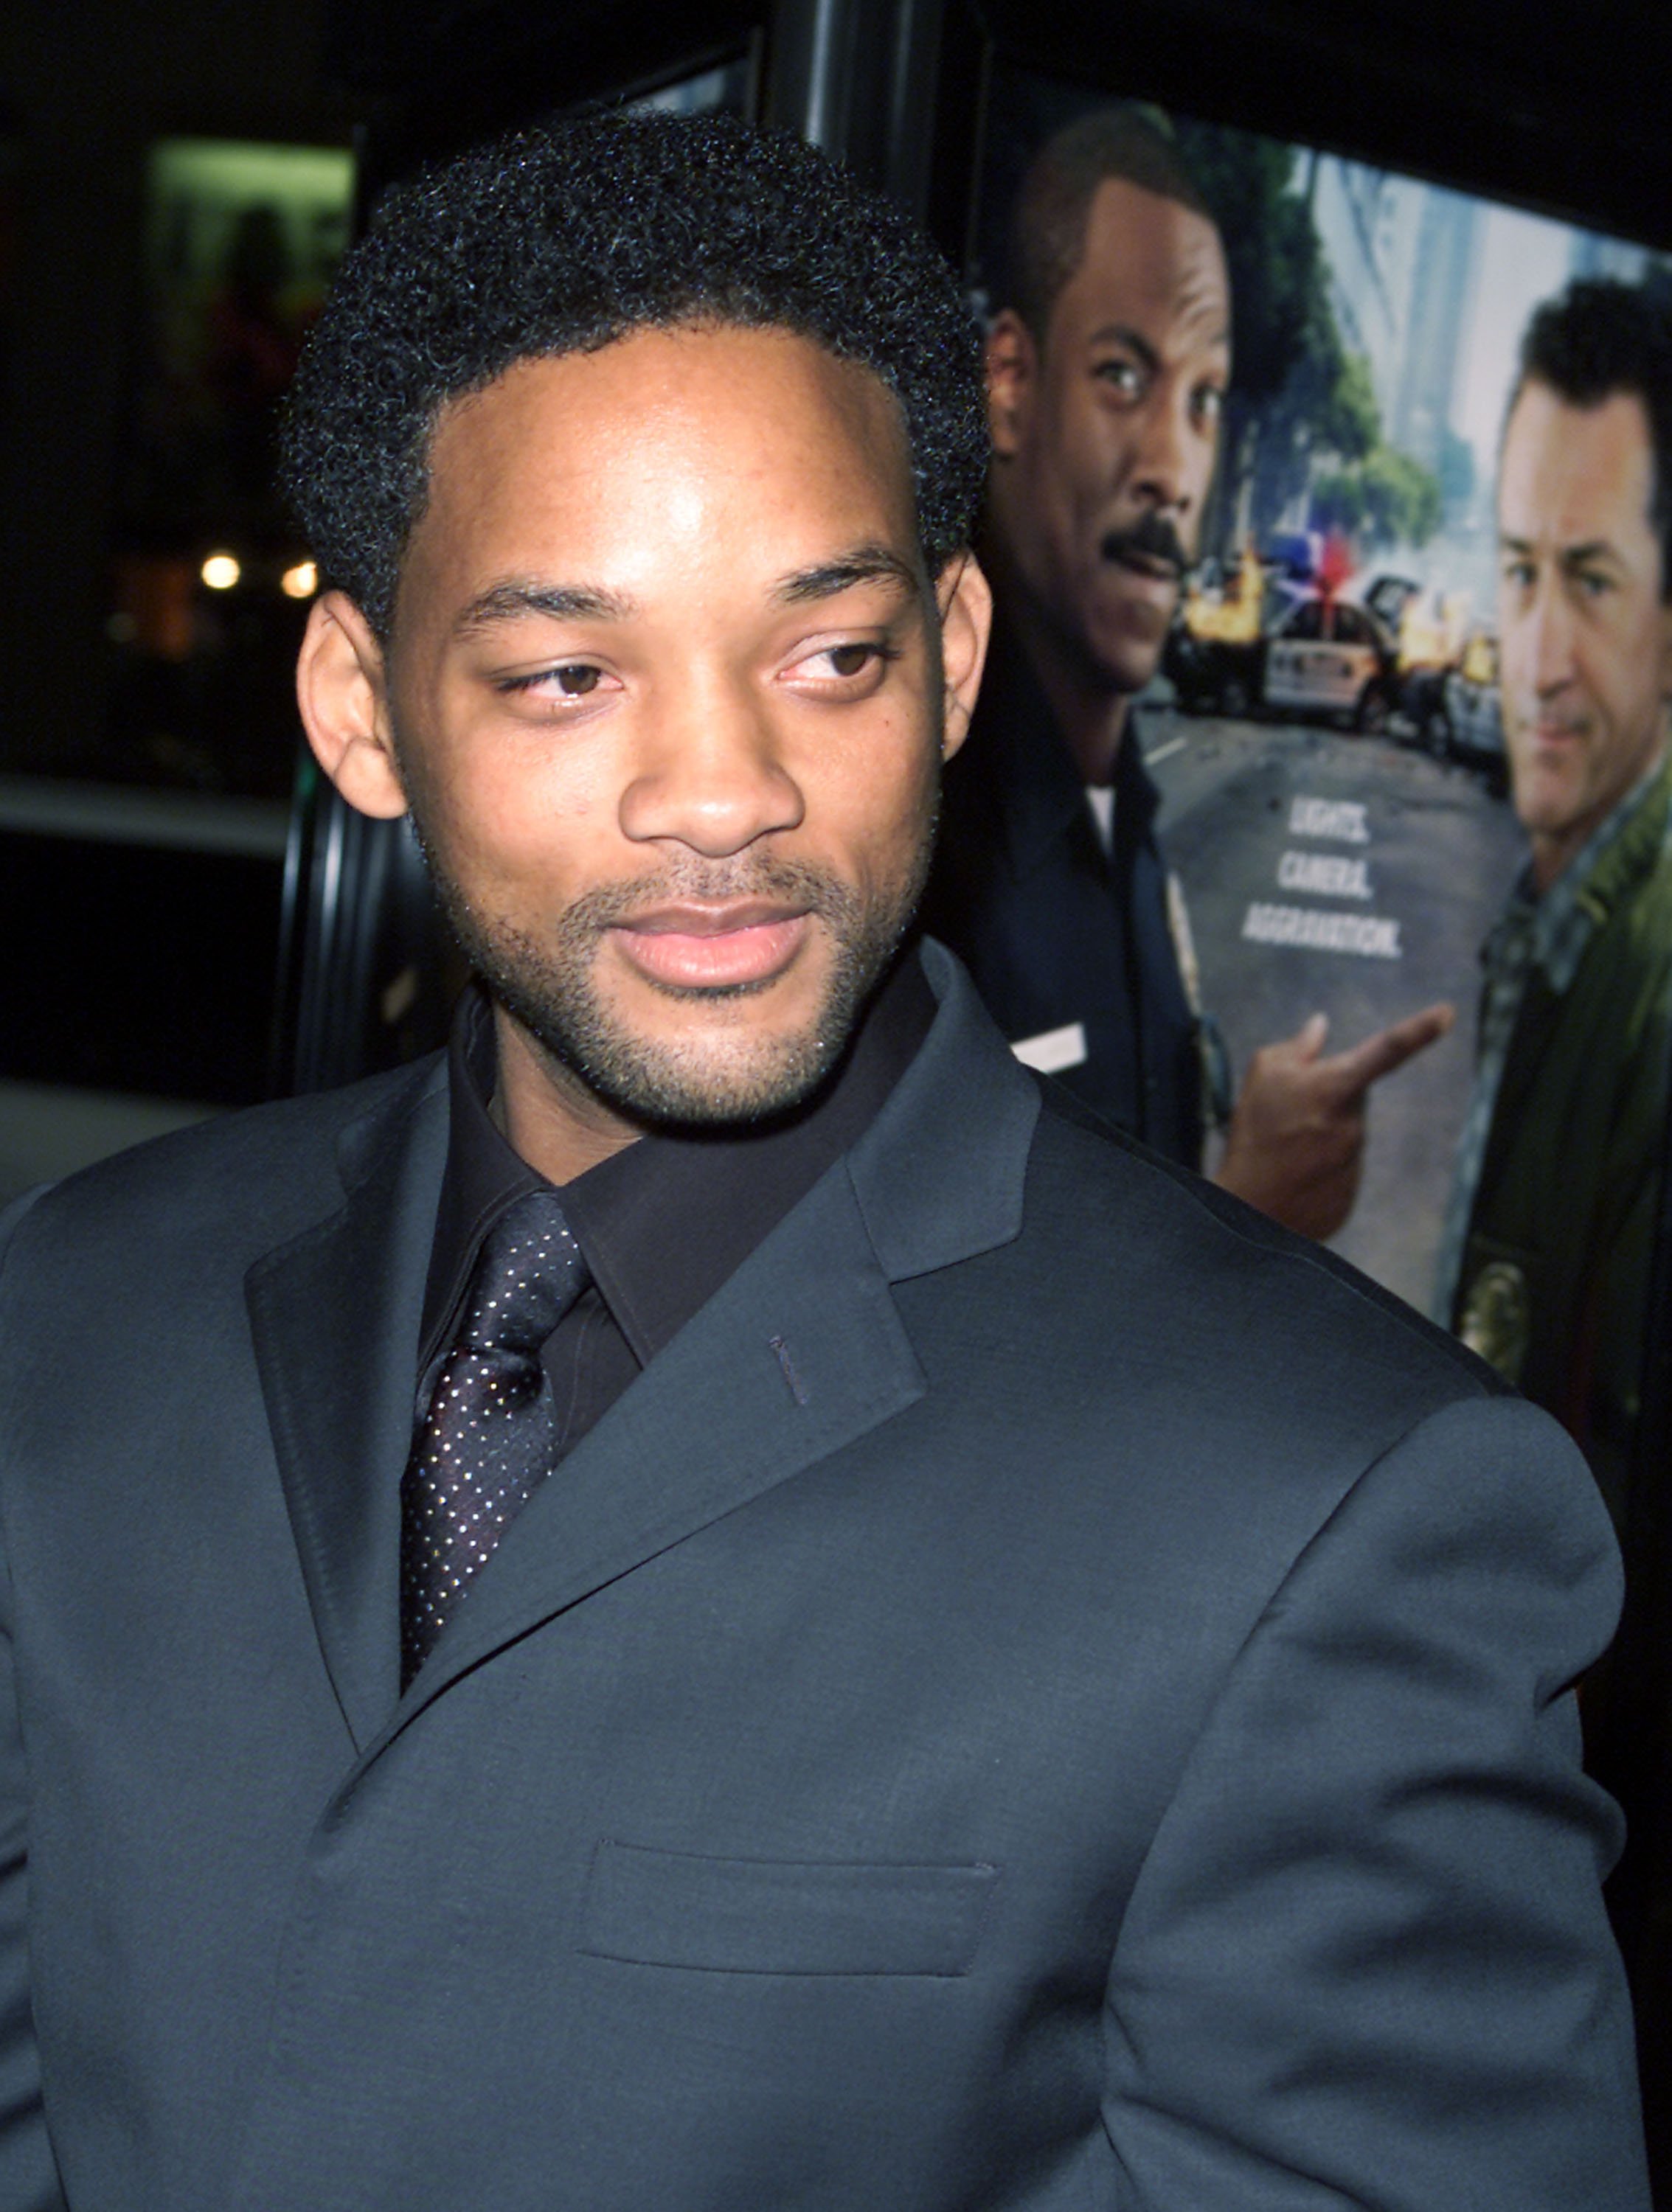 Will Smith at the premiere of "Showtime" at the Chinese Theater in Los Angeles, Ca. Monday, March 11, 2002. | Photo: GettyImage